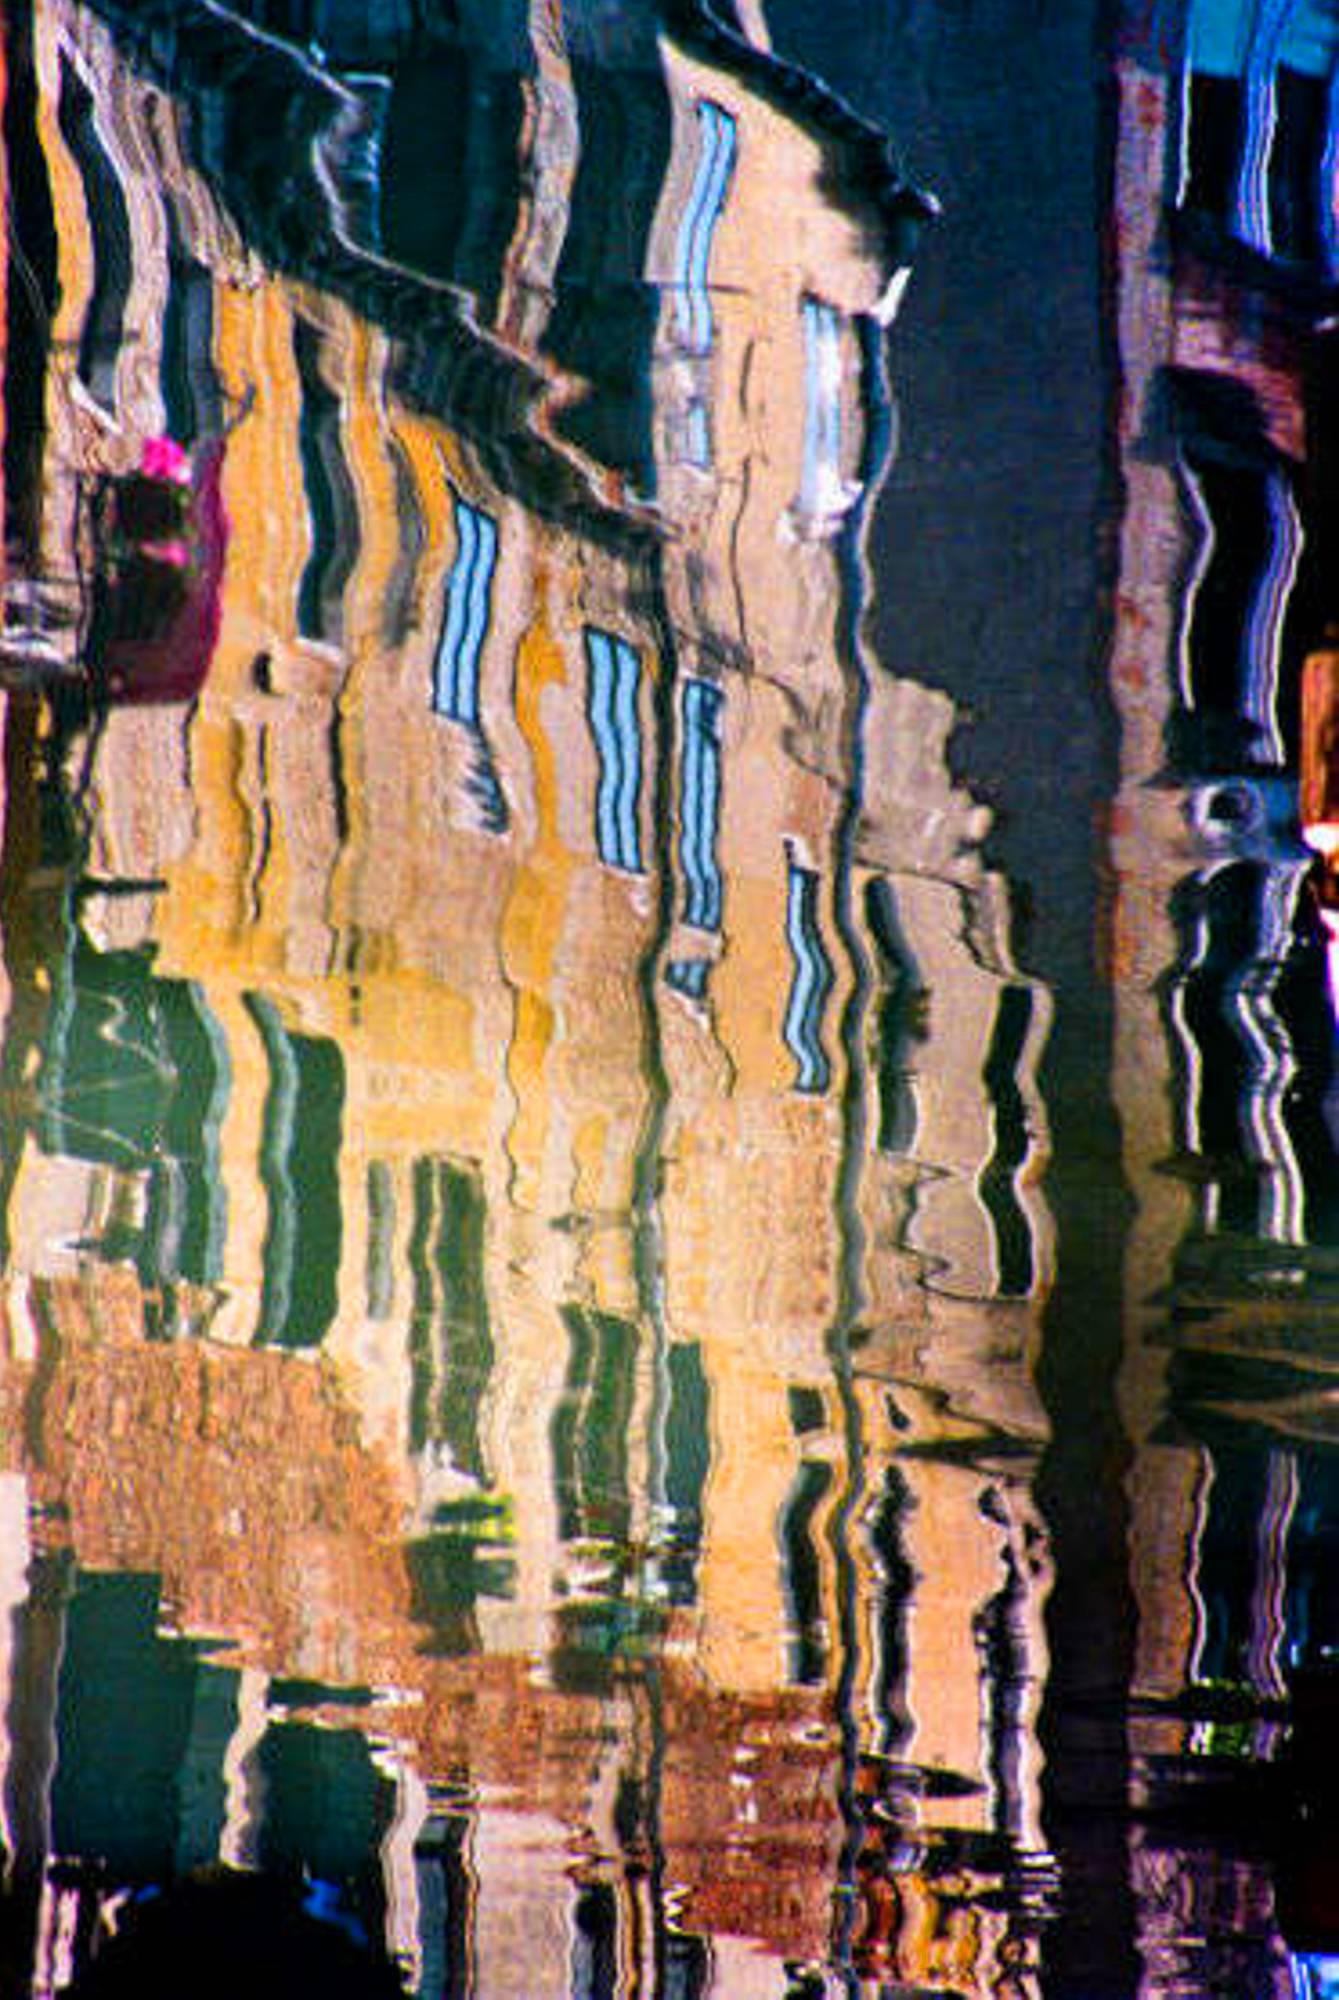 Robert Herman Abstract Photograph - Canal Reflections photograph, Venice, Italy 